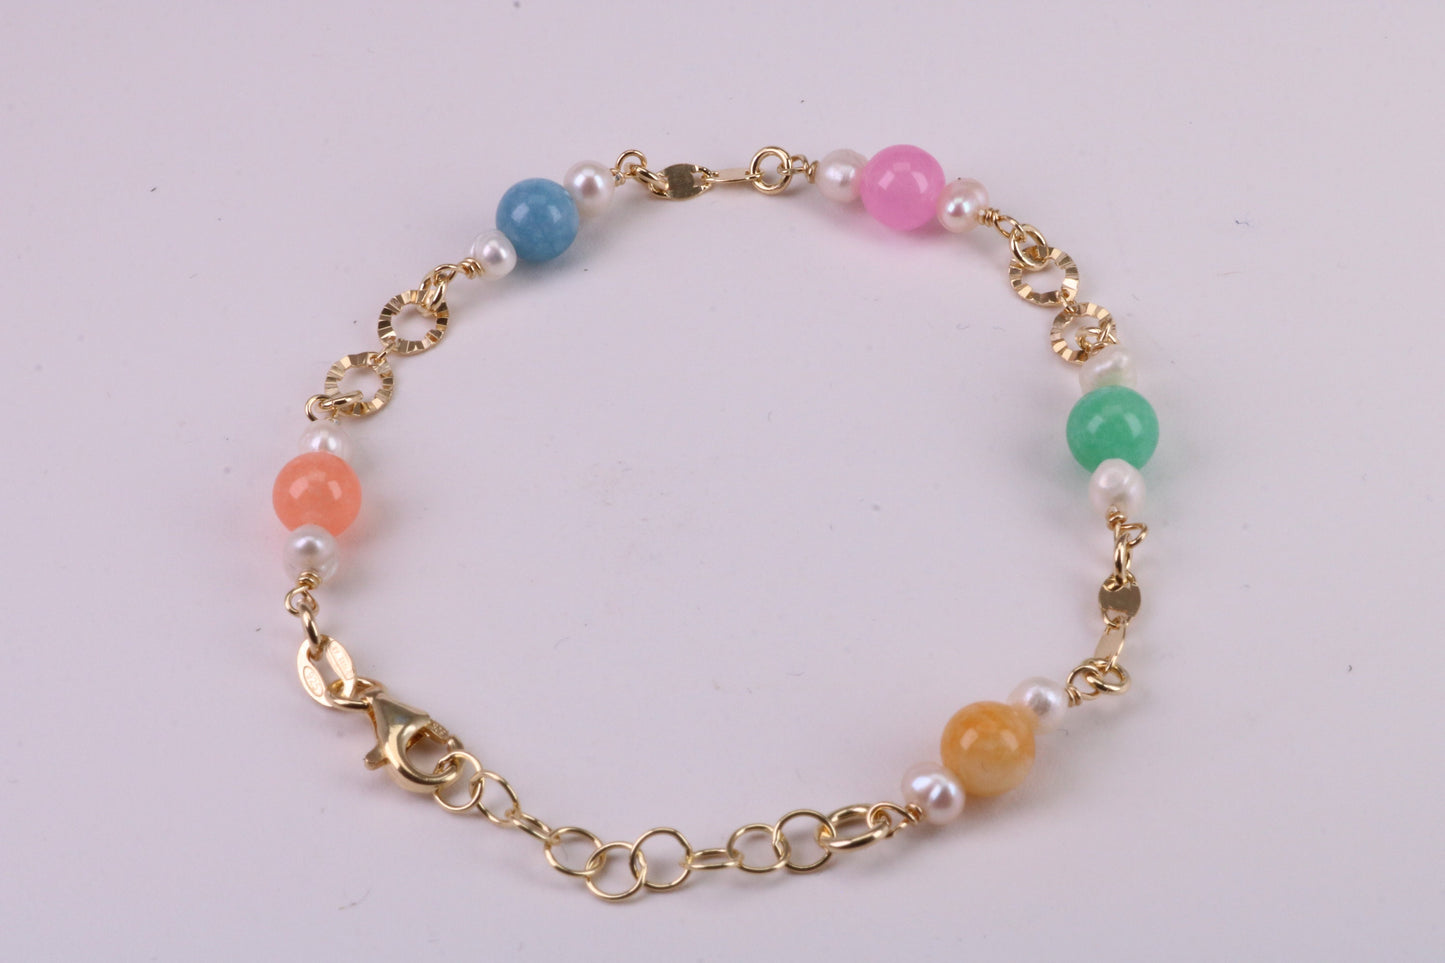 Rainbow Bracelet, With Length Adjustable Chain, Made from solid Sterling Silver and Further 18ct Yellow Gold Plated